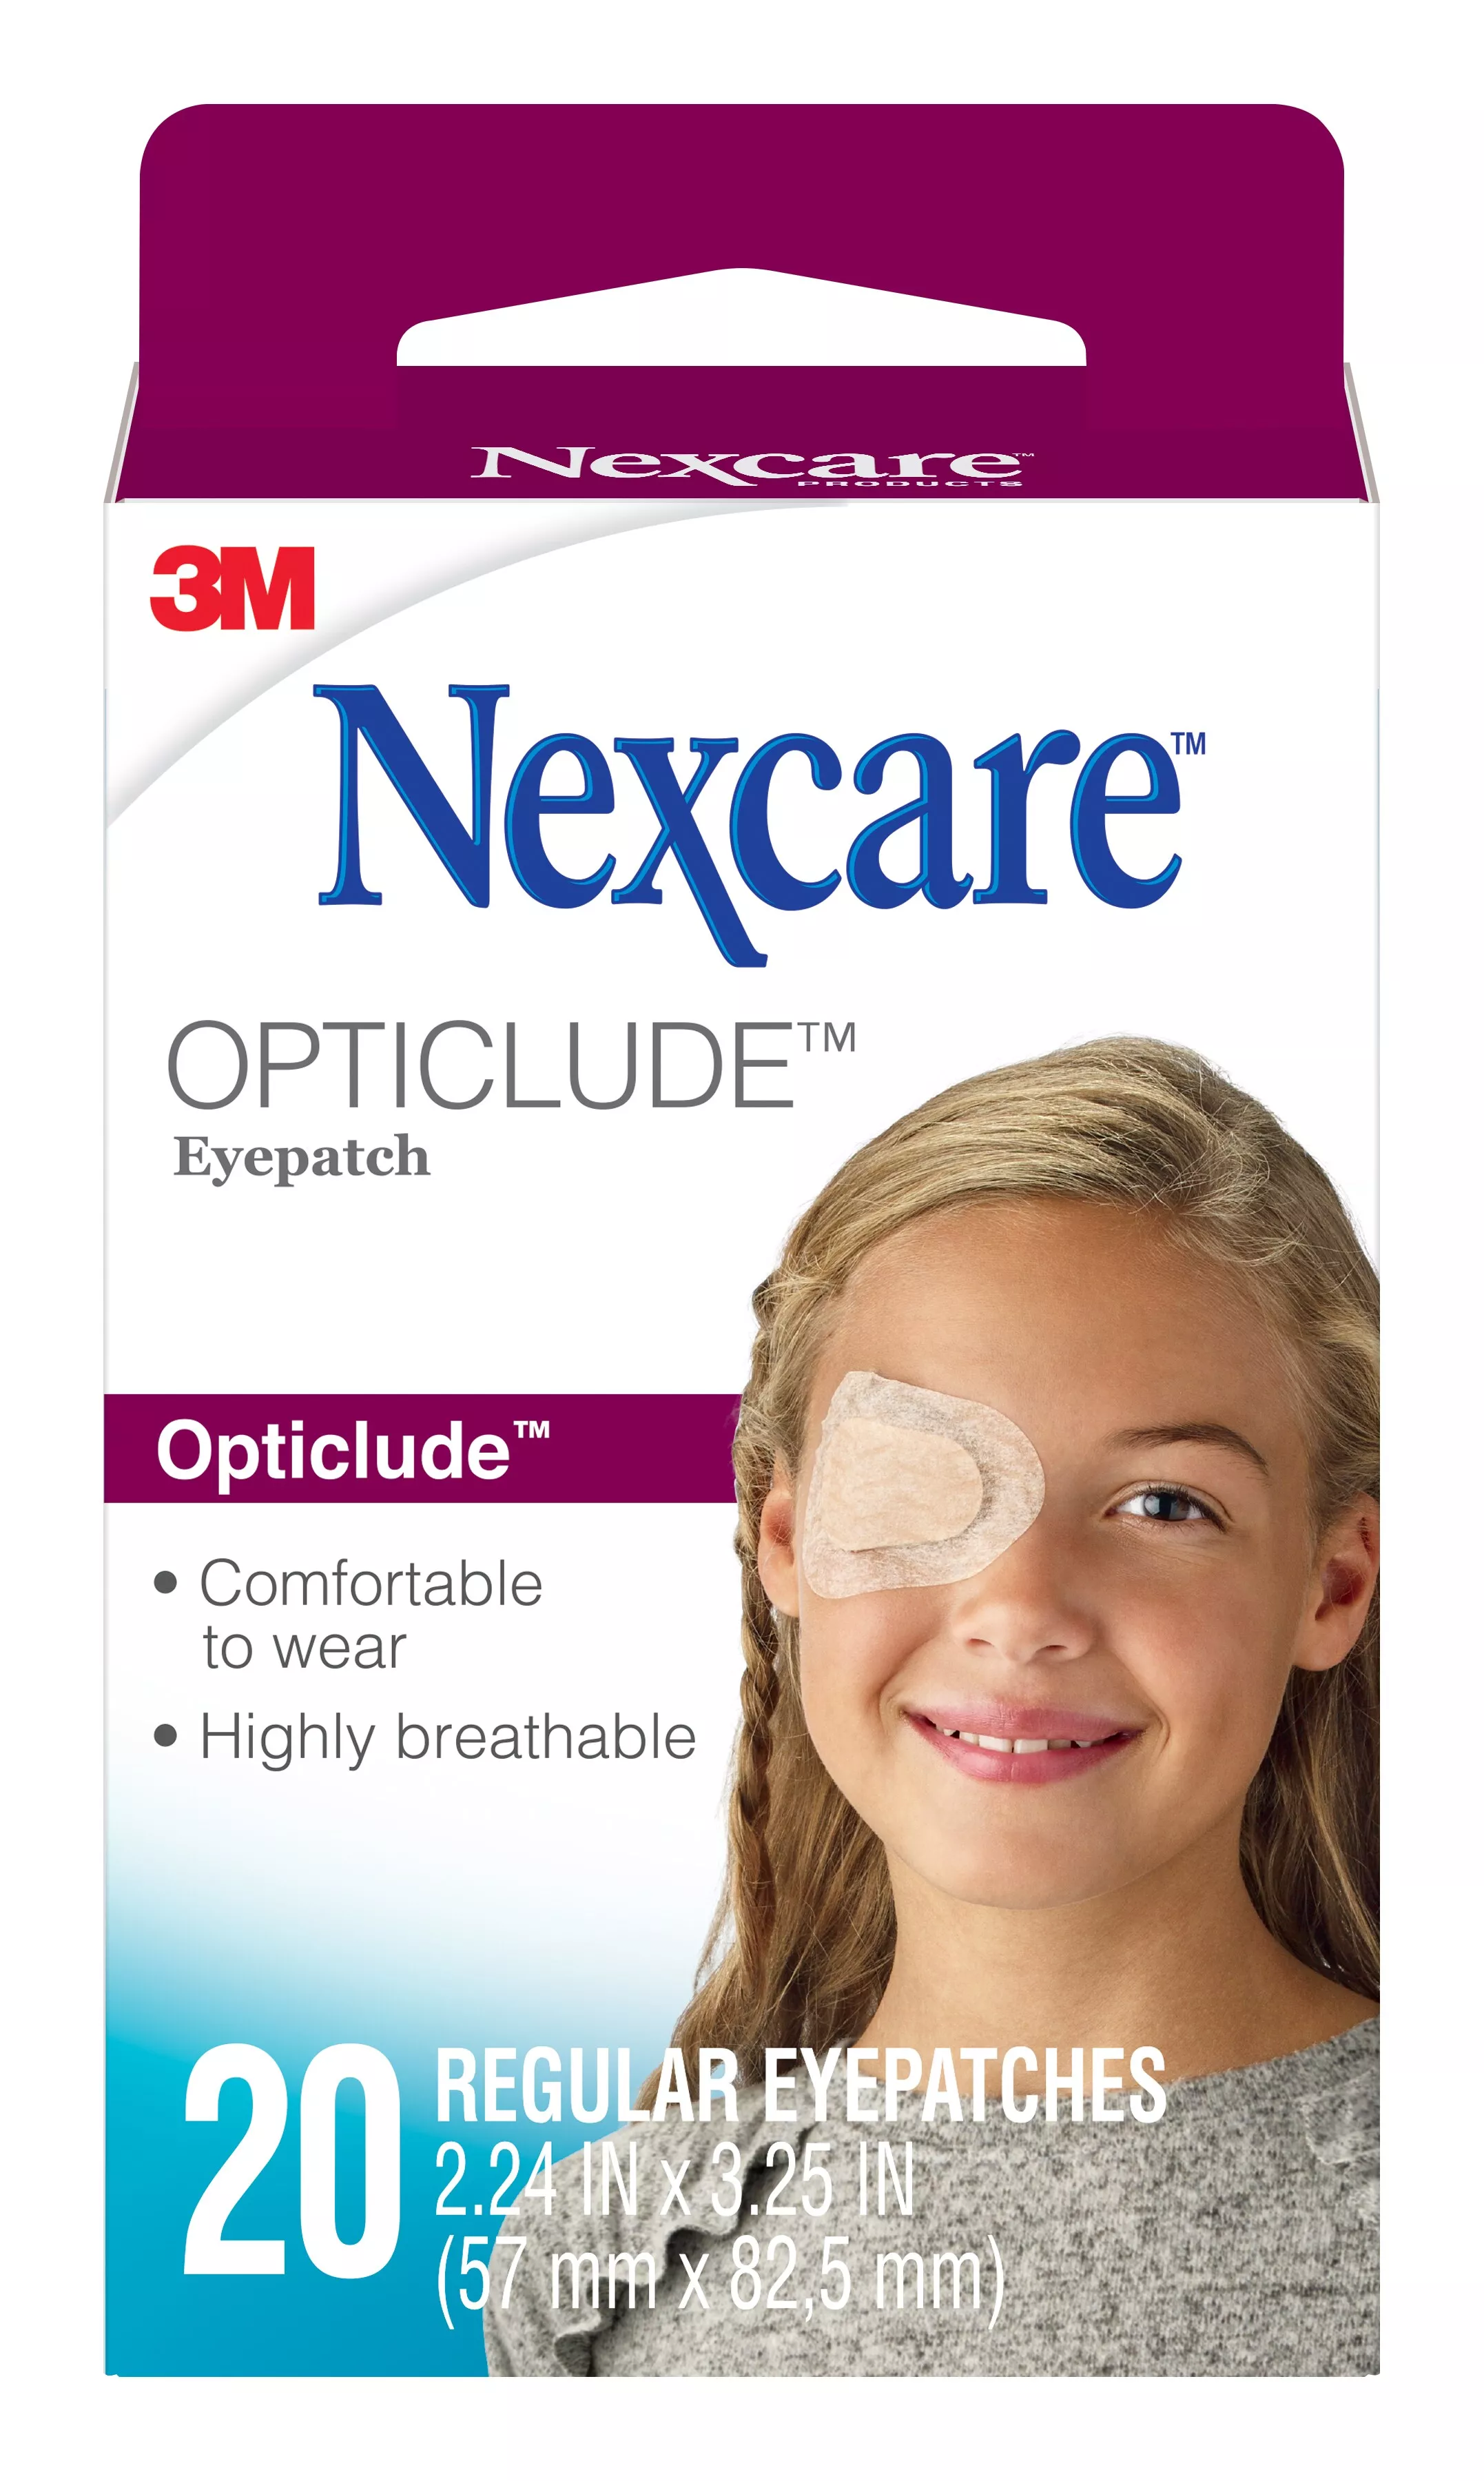 Nexcare™ Opticlude™ Orthoptic Eye Patch 1539, Regular, 3.18 in x 2.18 in
(81 mm x 55.5 mm) 20 patches/box